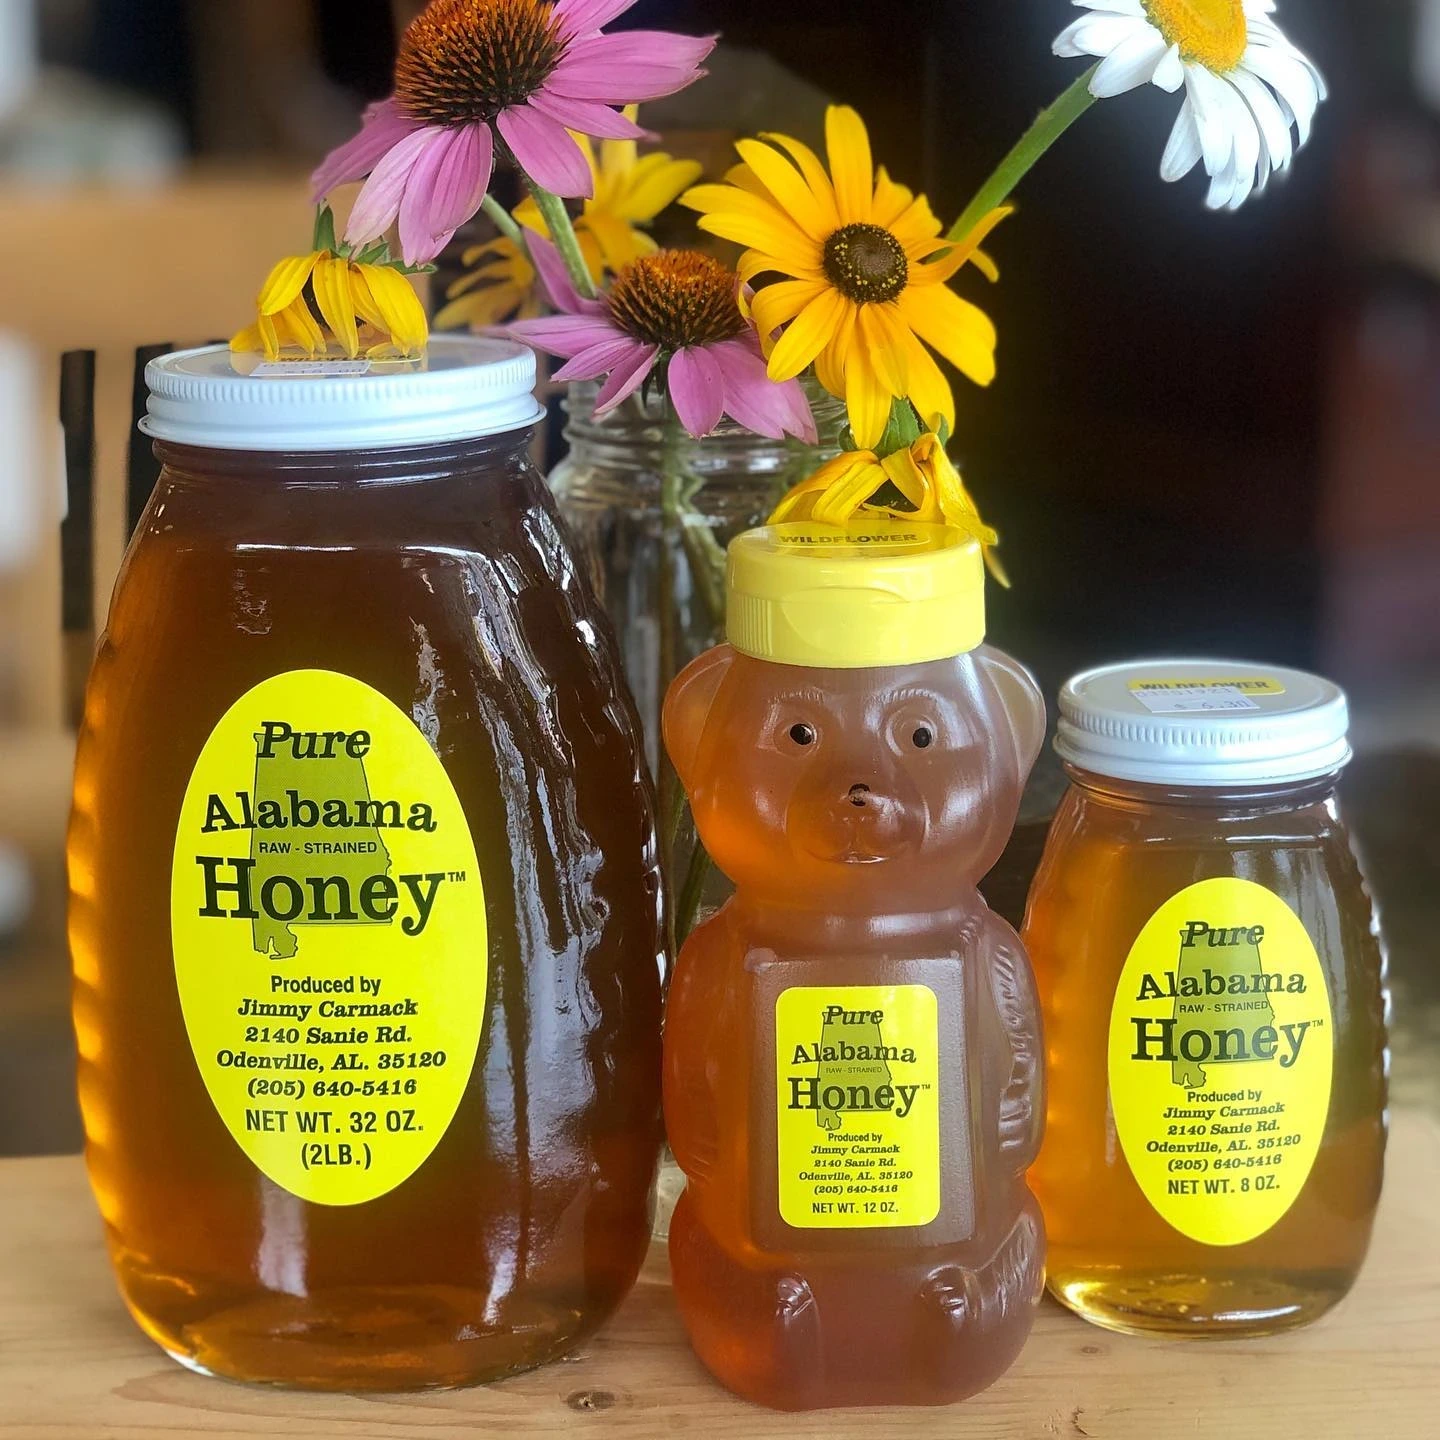 Three bottles of local Alabama honey in front of wildflowers